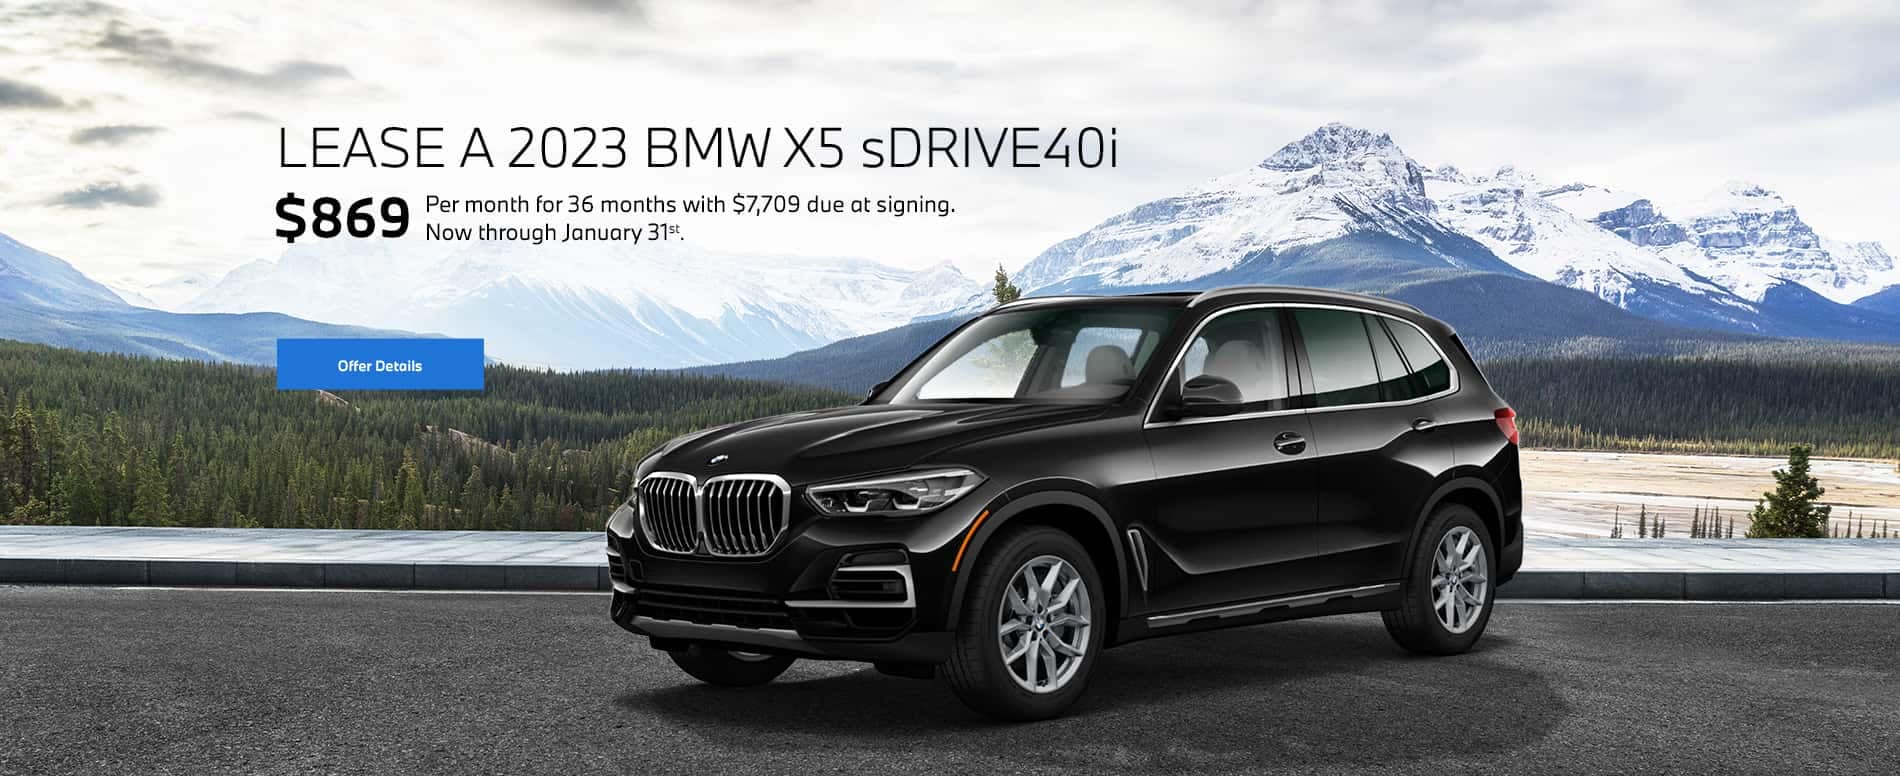 2023 X5 lease starting at $869 per month for 36 months